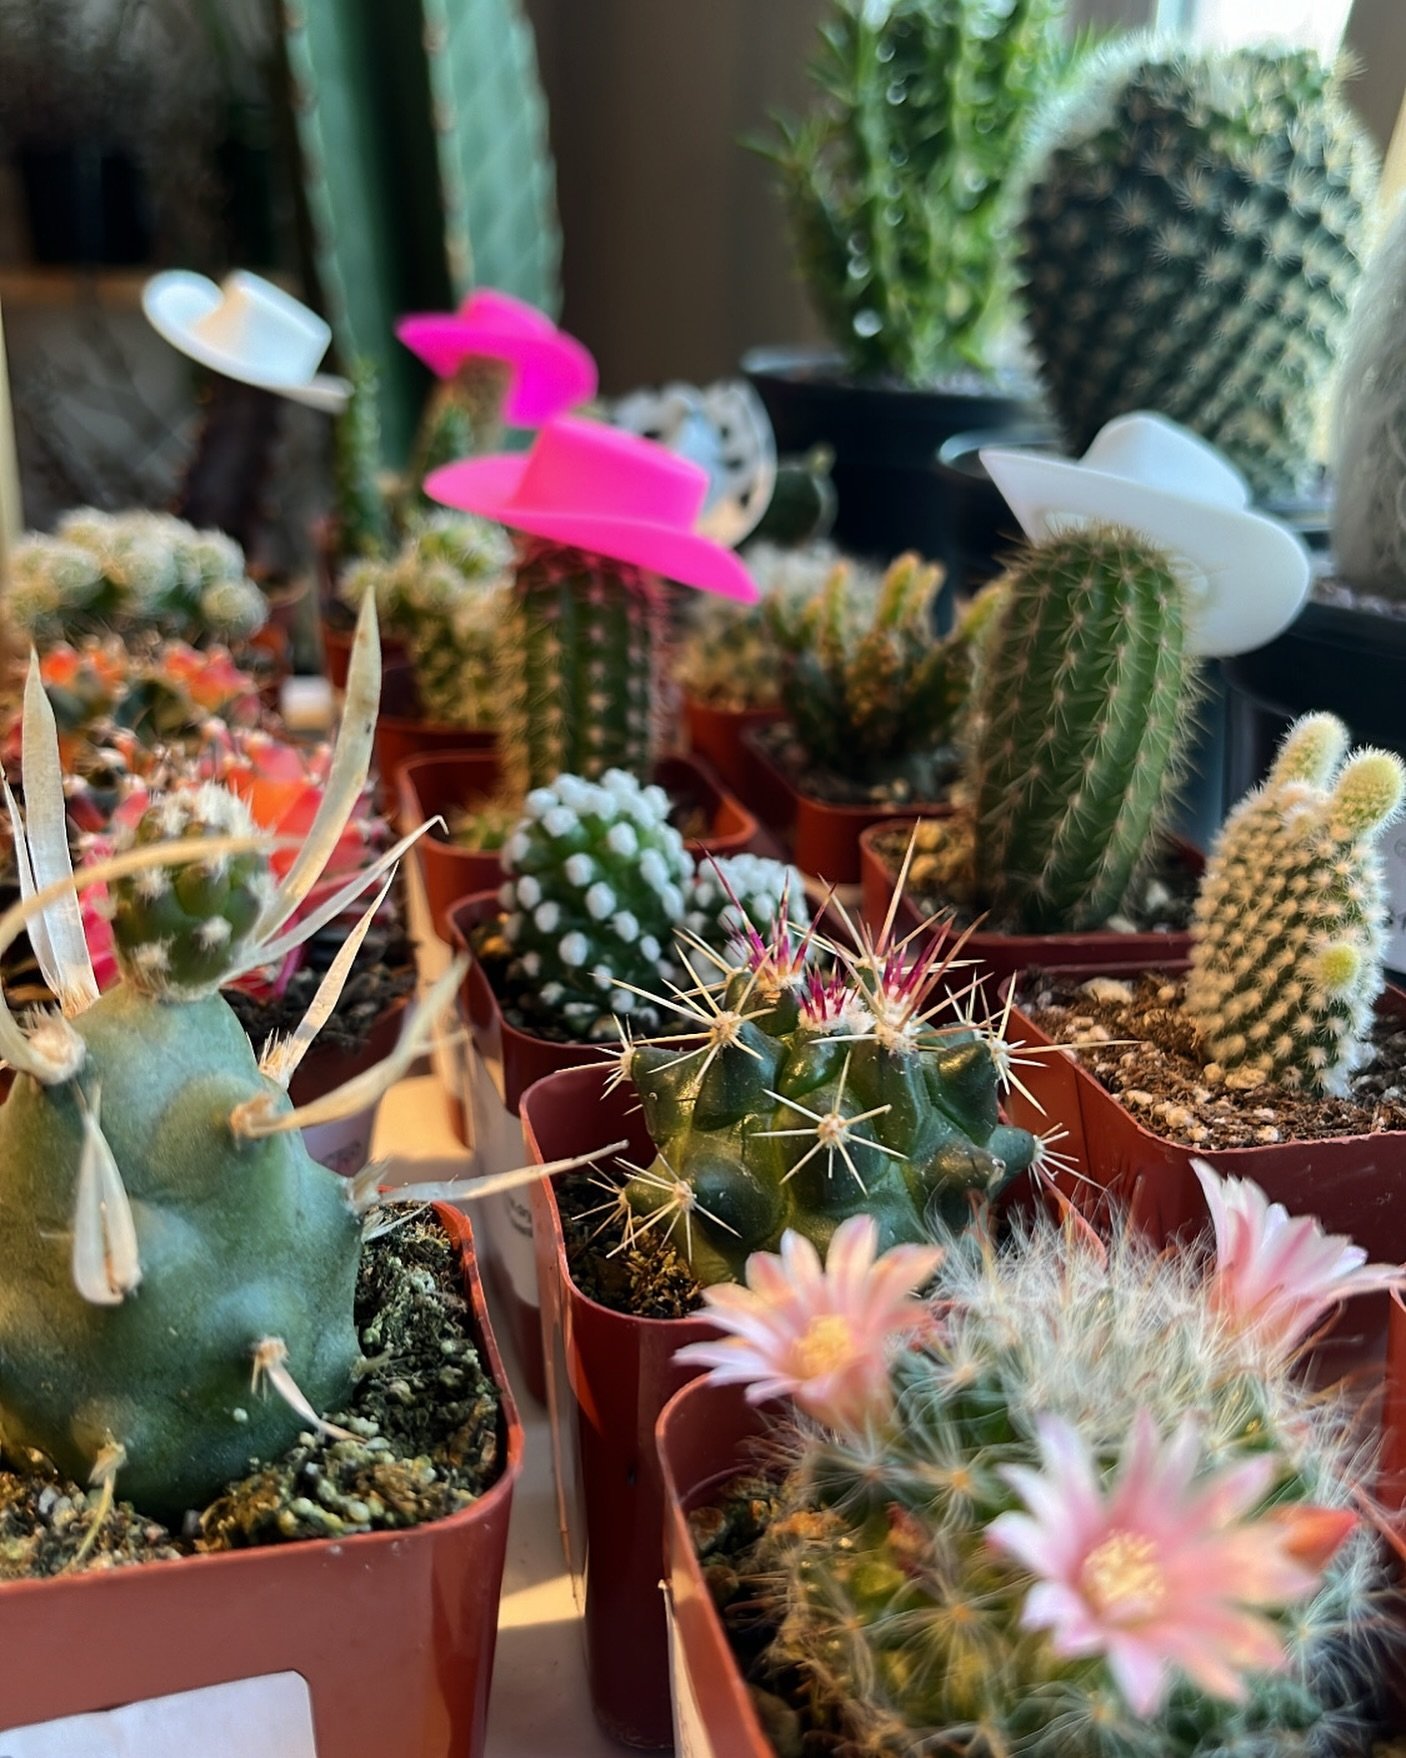 Add a cowgirl hat to your cactus &amp; we guarantee it&rsquo;ll make you smile 🤠🌵 giddy on up to the shop to pick out your fave.